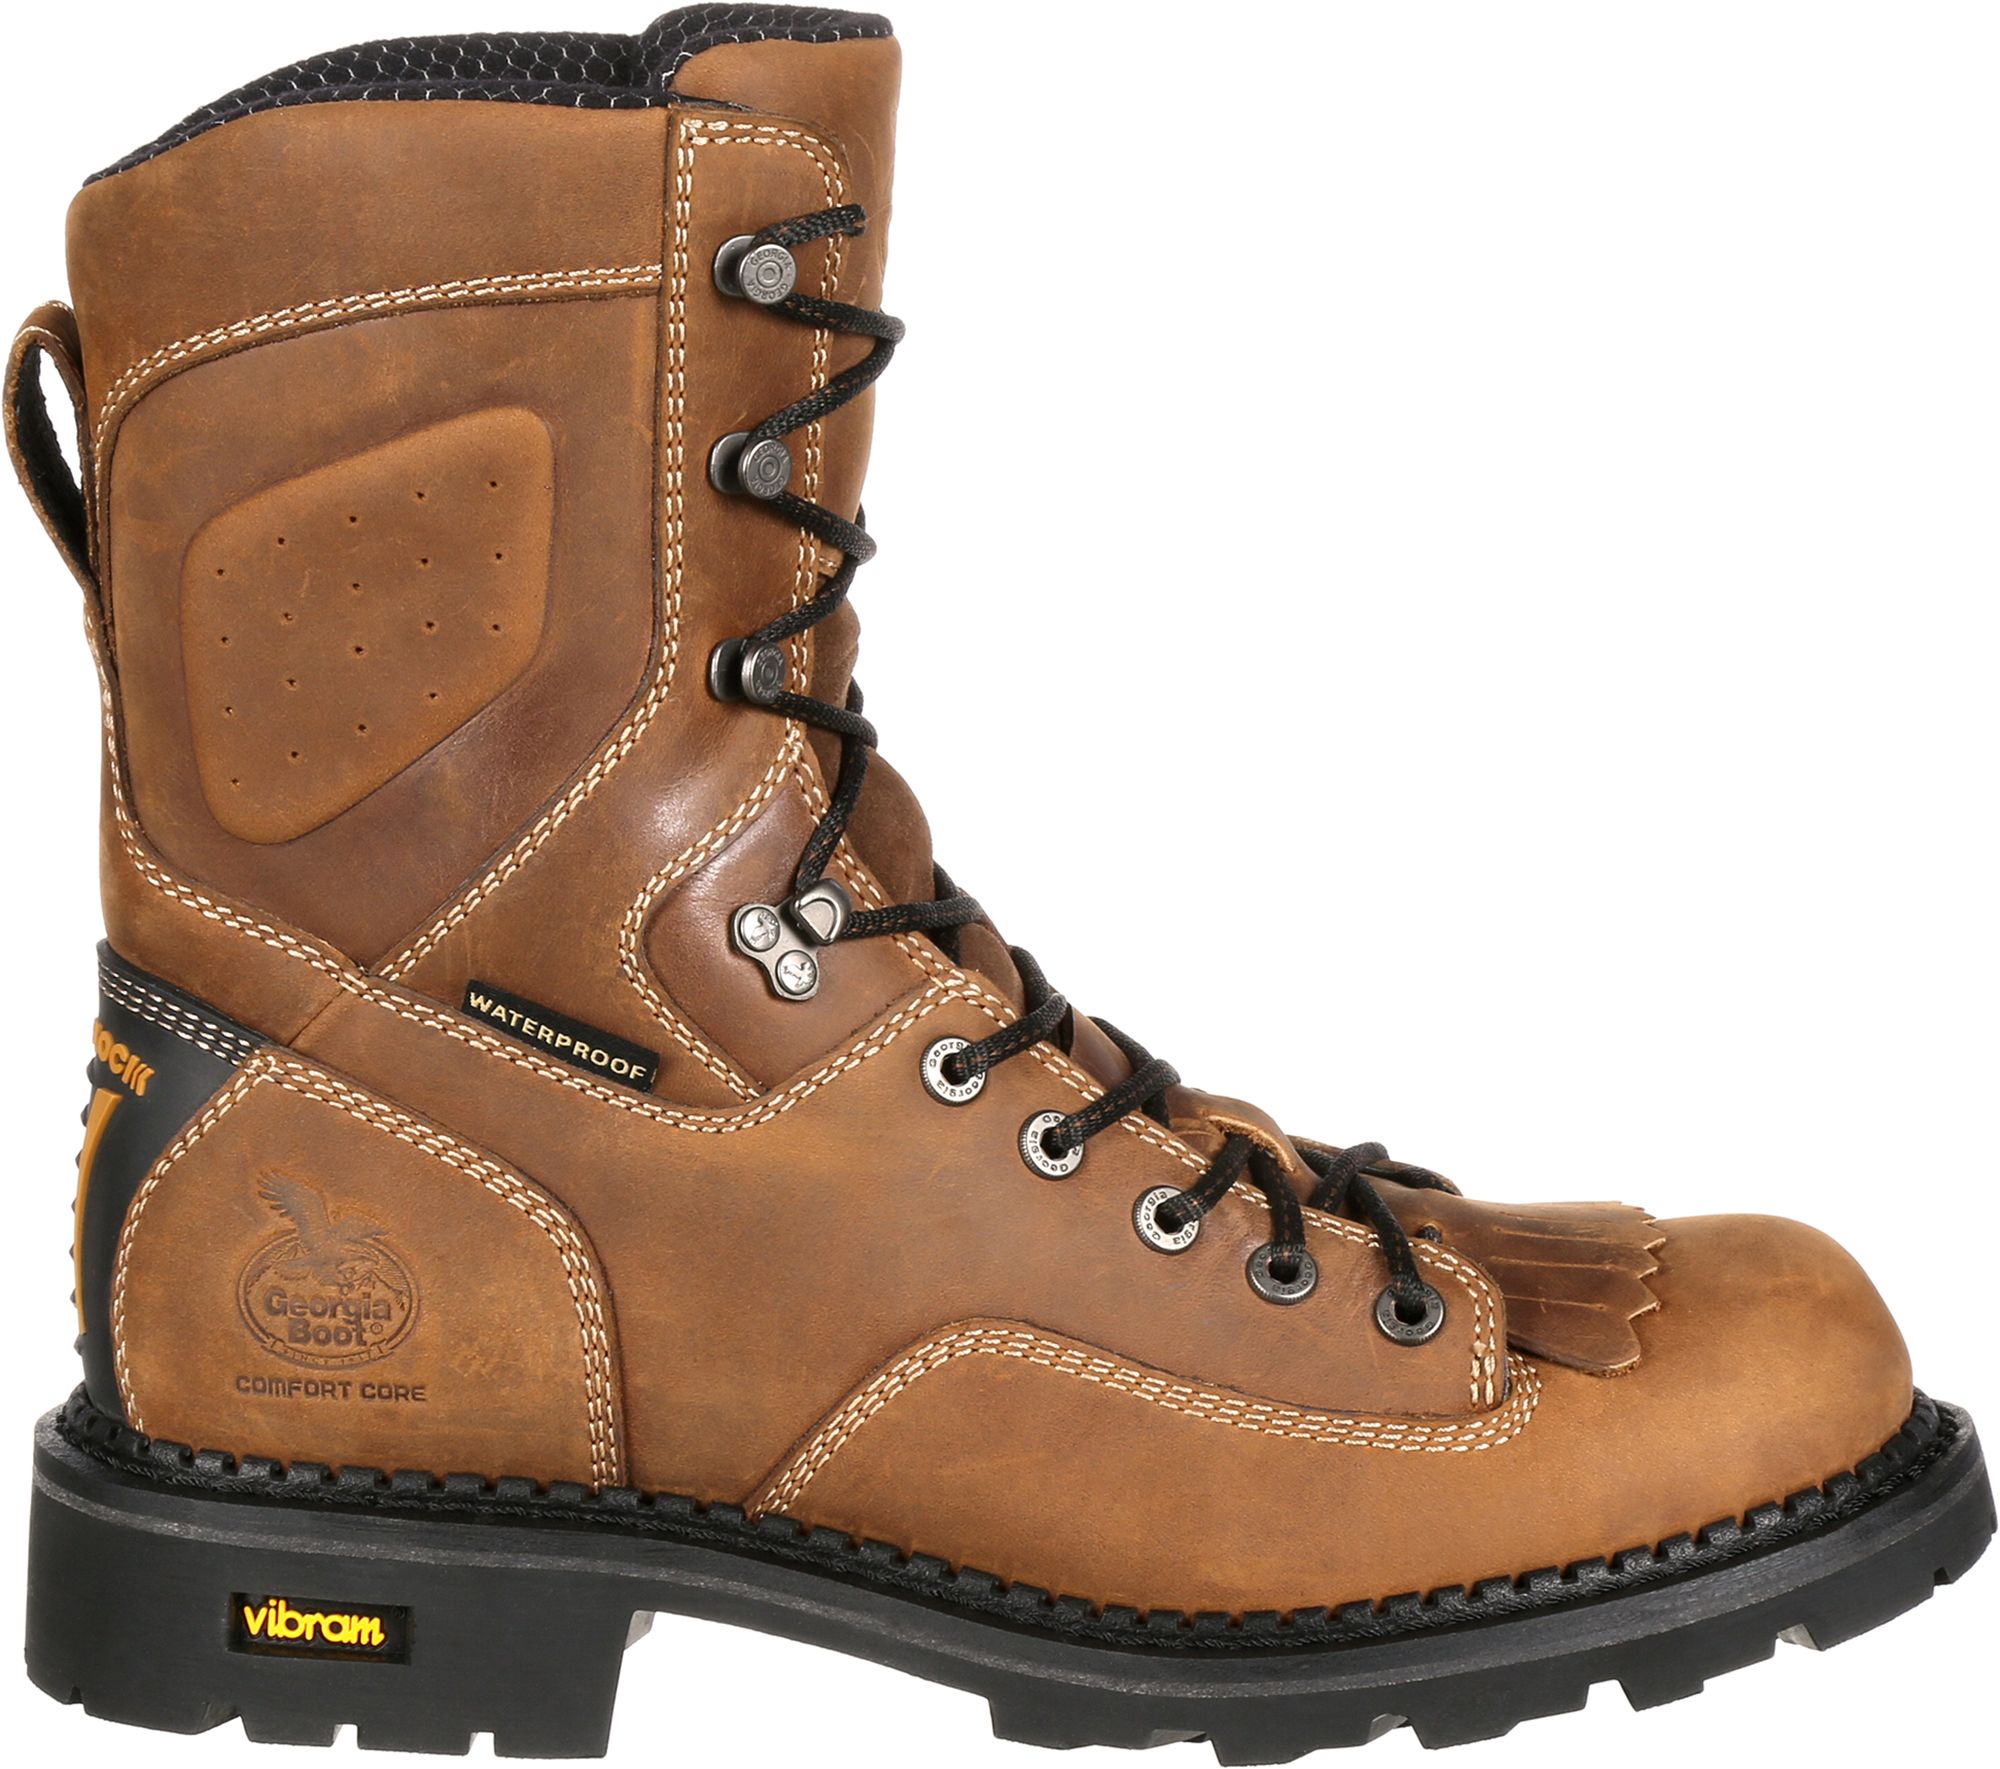 composite toe logger work boots